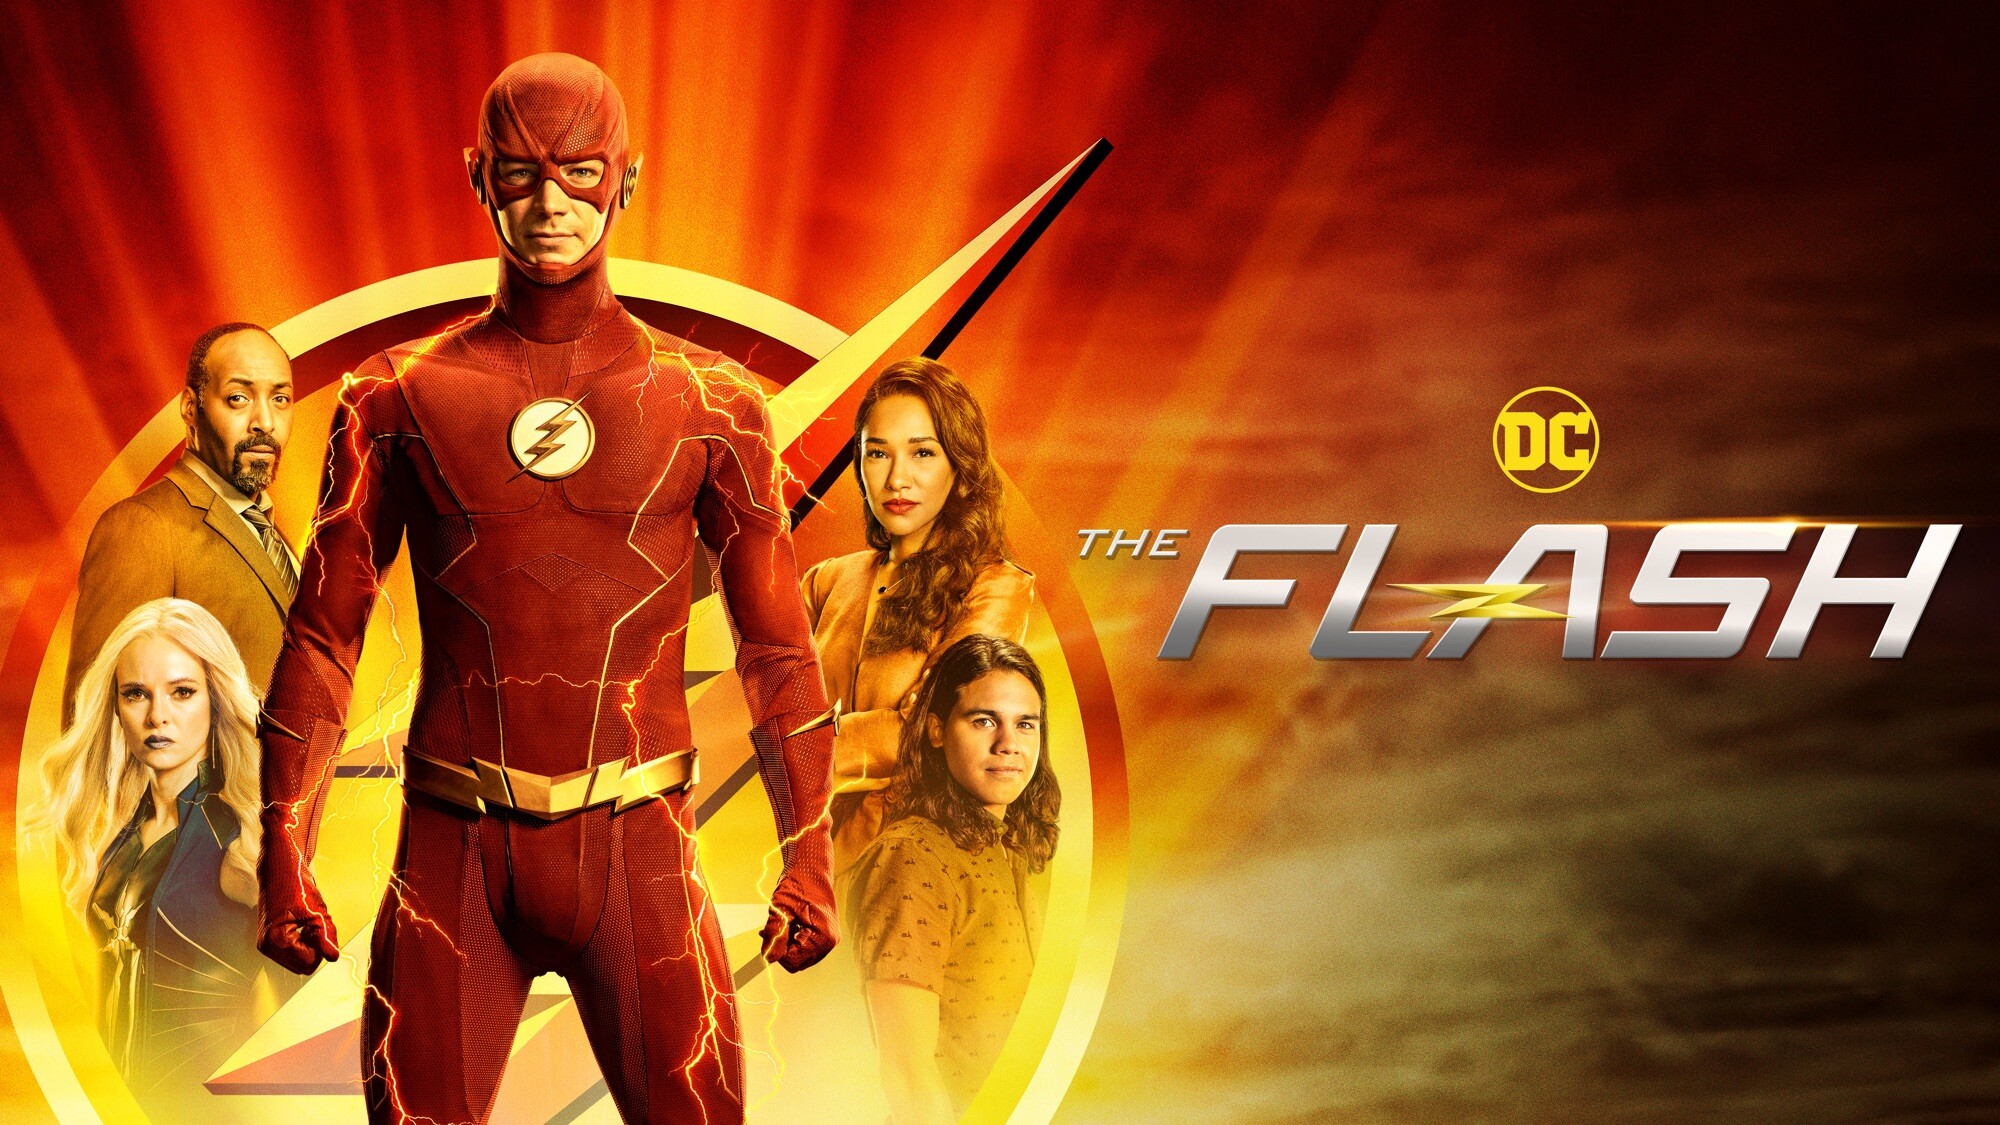 Flash (DC): An American superhero television series developed by Greg Berlanti, Andrew Kreisberg, and Geoff Johns, airing on The CW. 2000x1130 HD Wallpaper.